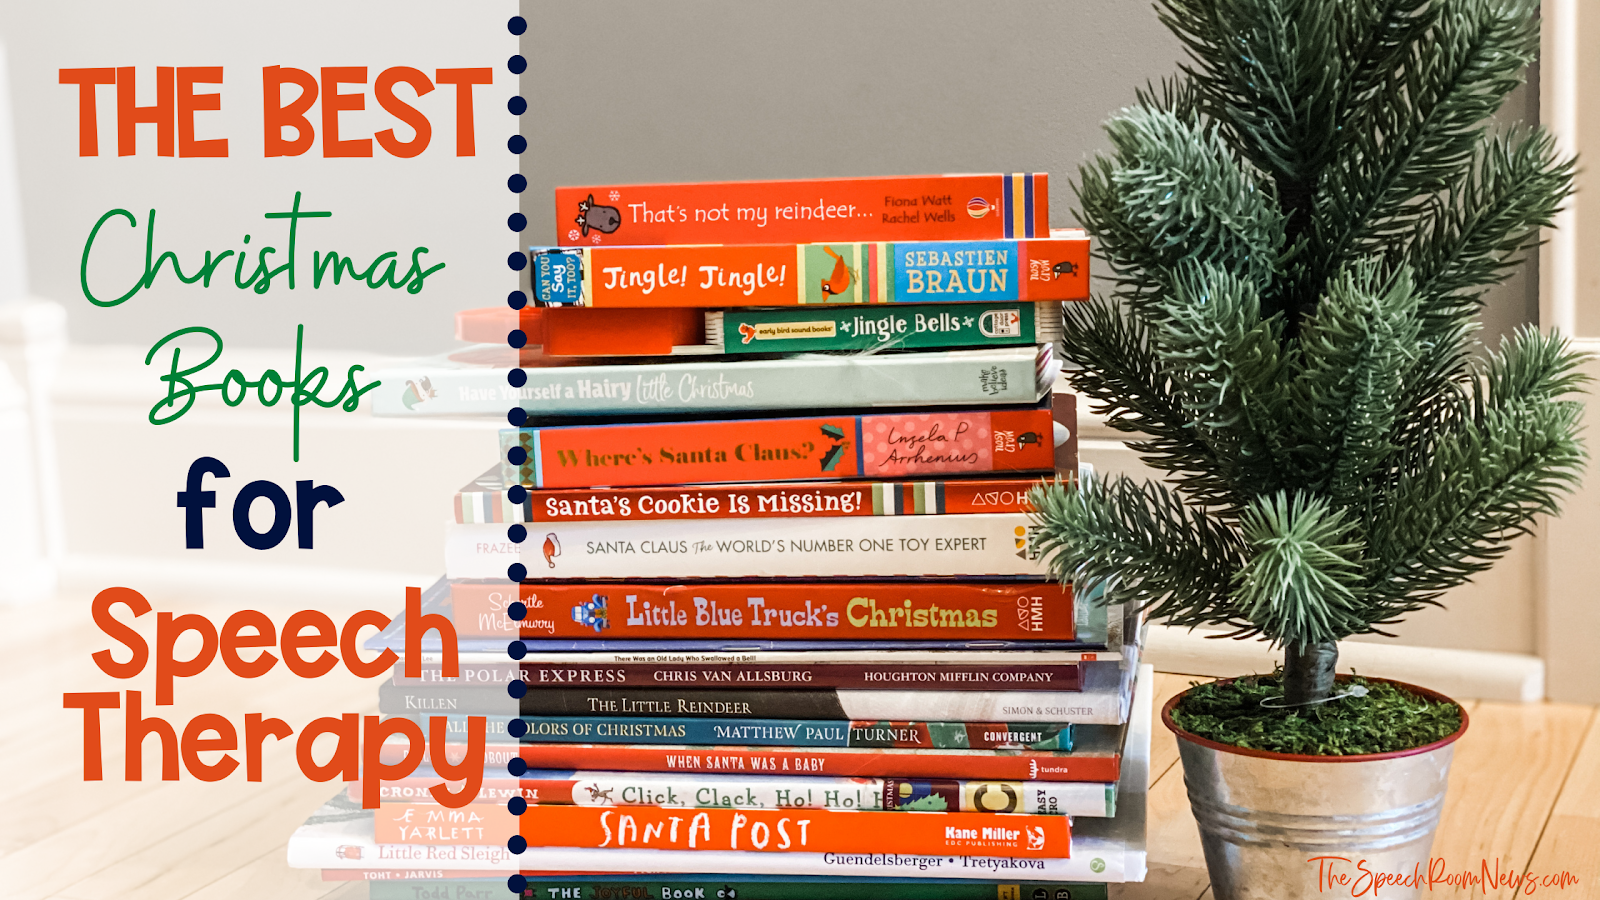 The Best Christmas Books for Speech Therapy - Speech Room News